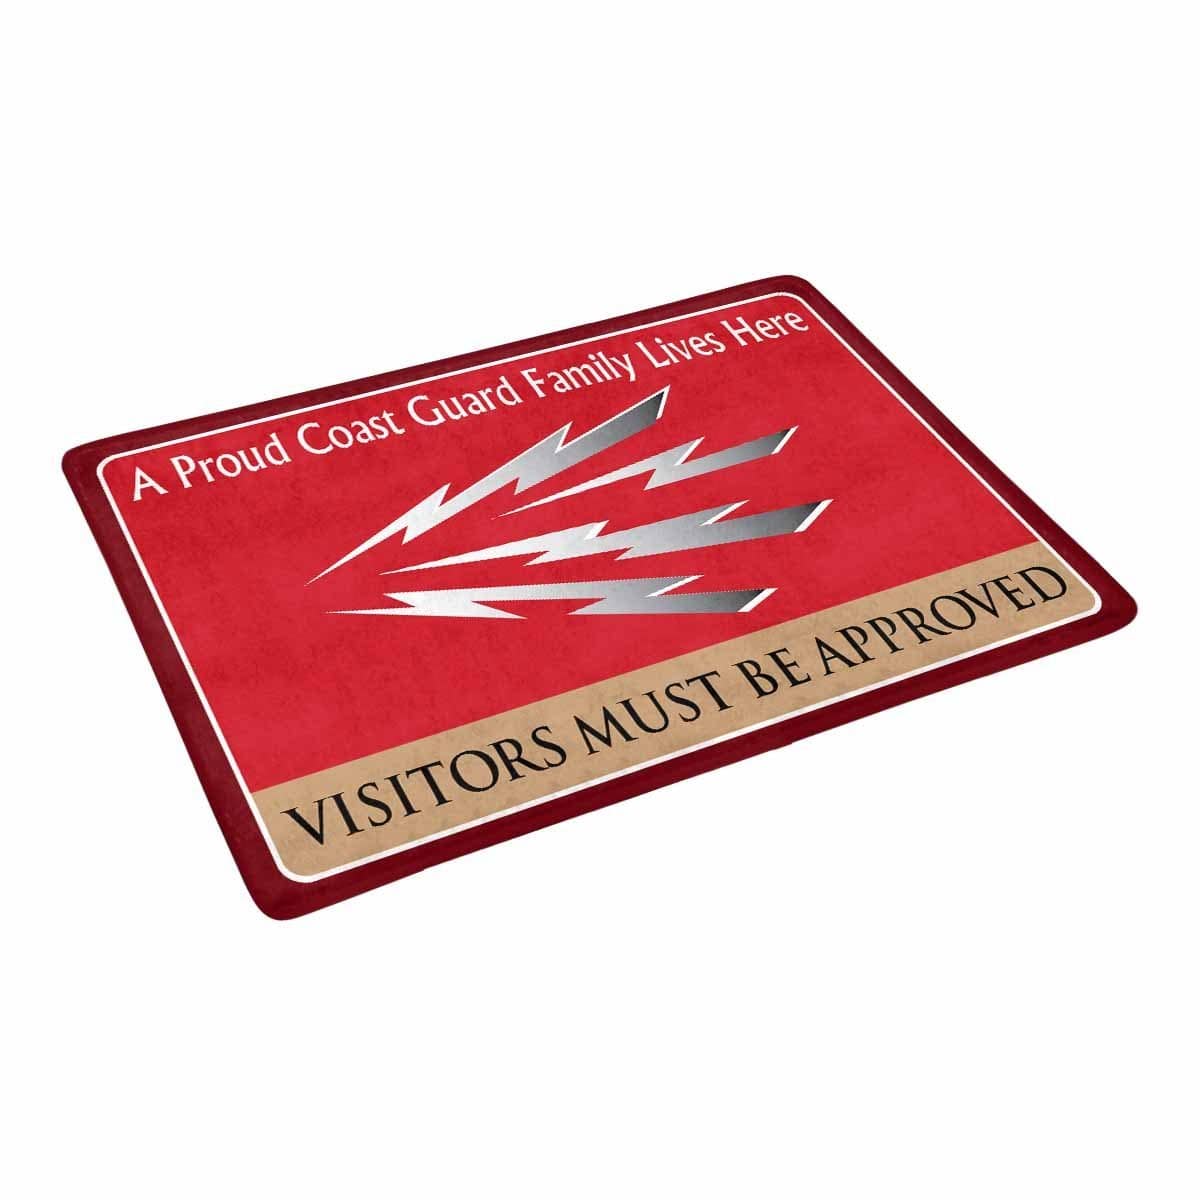 US Coast Guard Telecommunications Specialist TC Logo Family Doormat - Visitors must be approved (23.6 inches x 15.7 inches)-Doormat-USCG-Rate-Veterans Nation